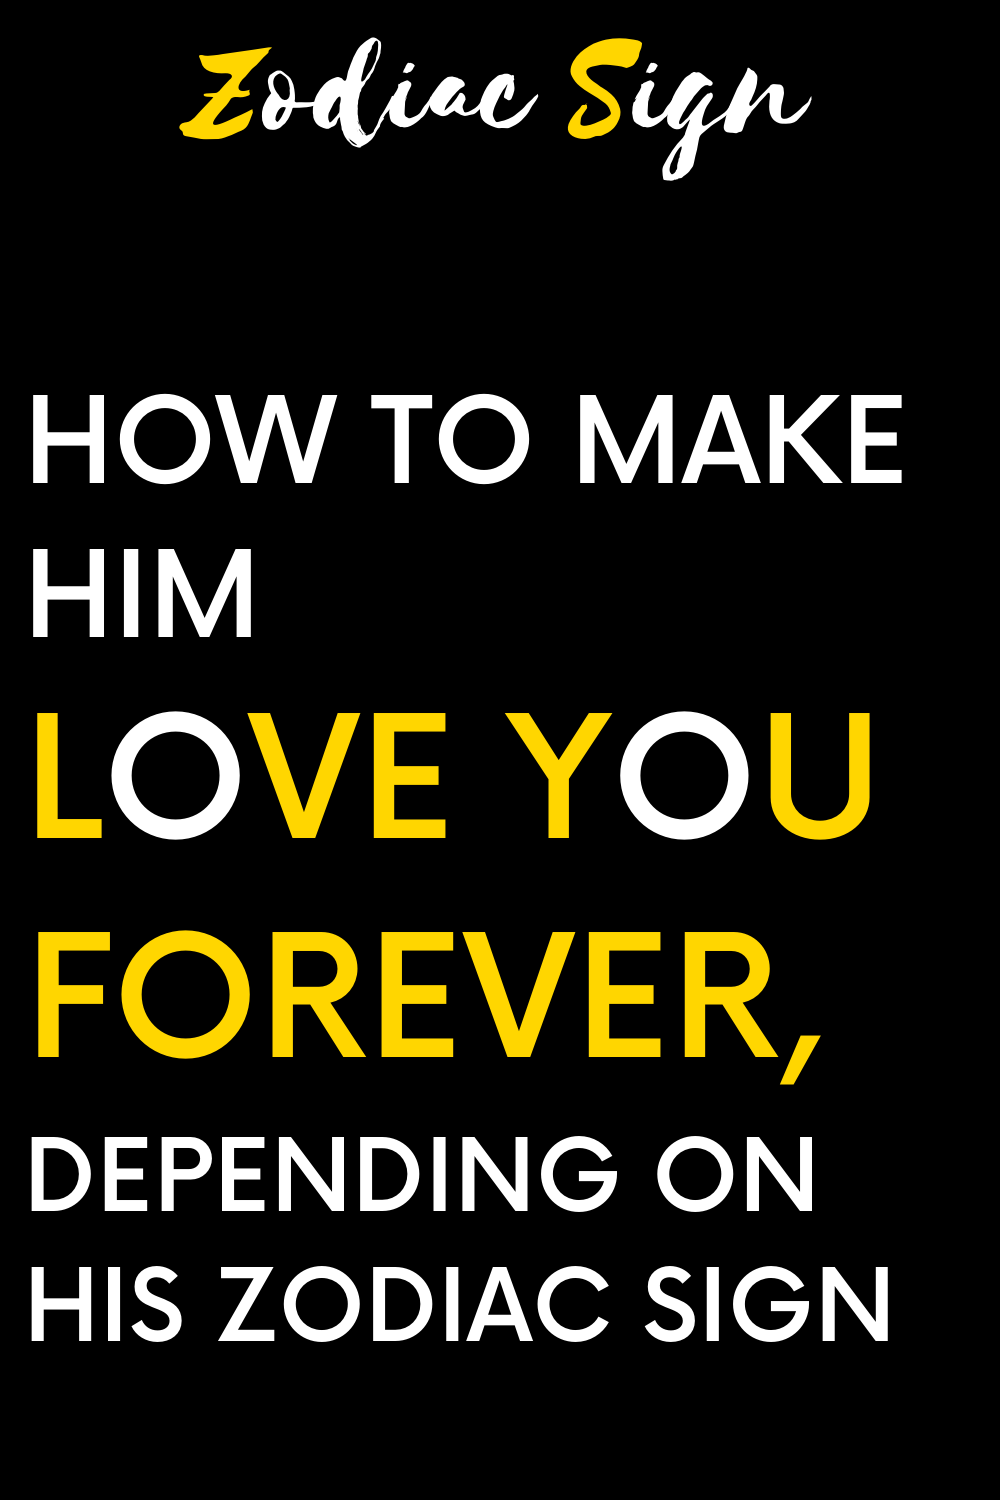 How to make him love you forever, depending on his zodiac sign